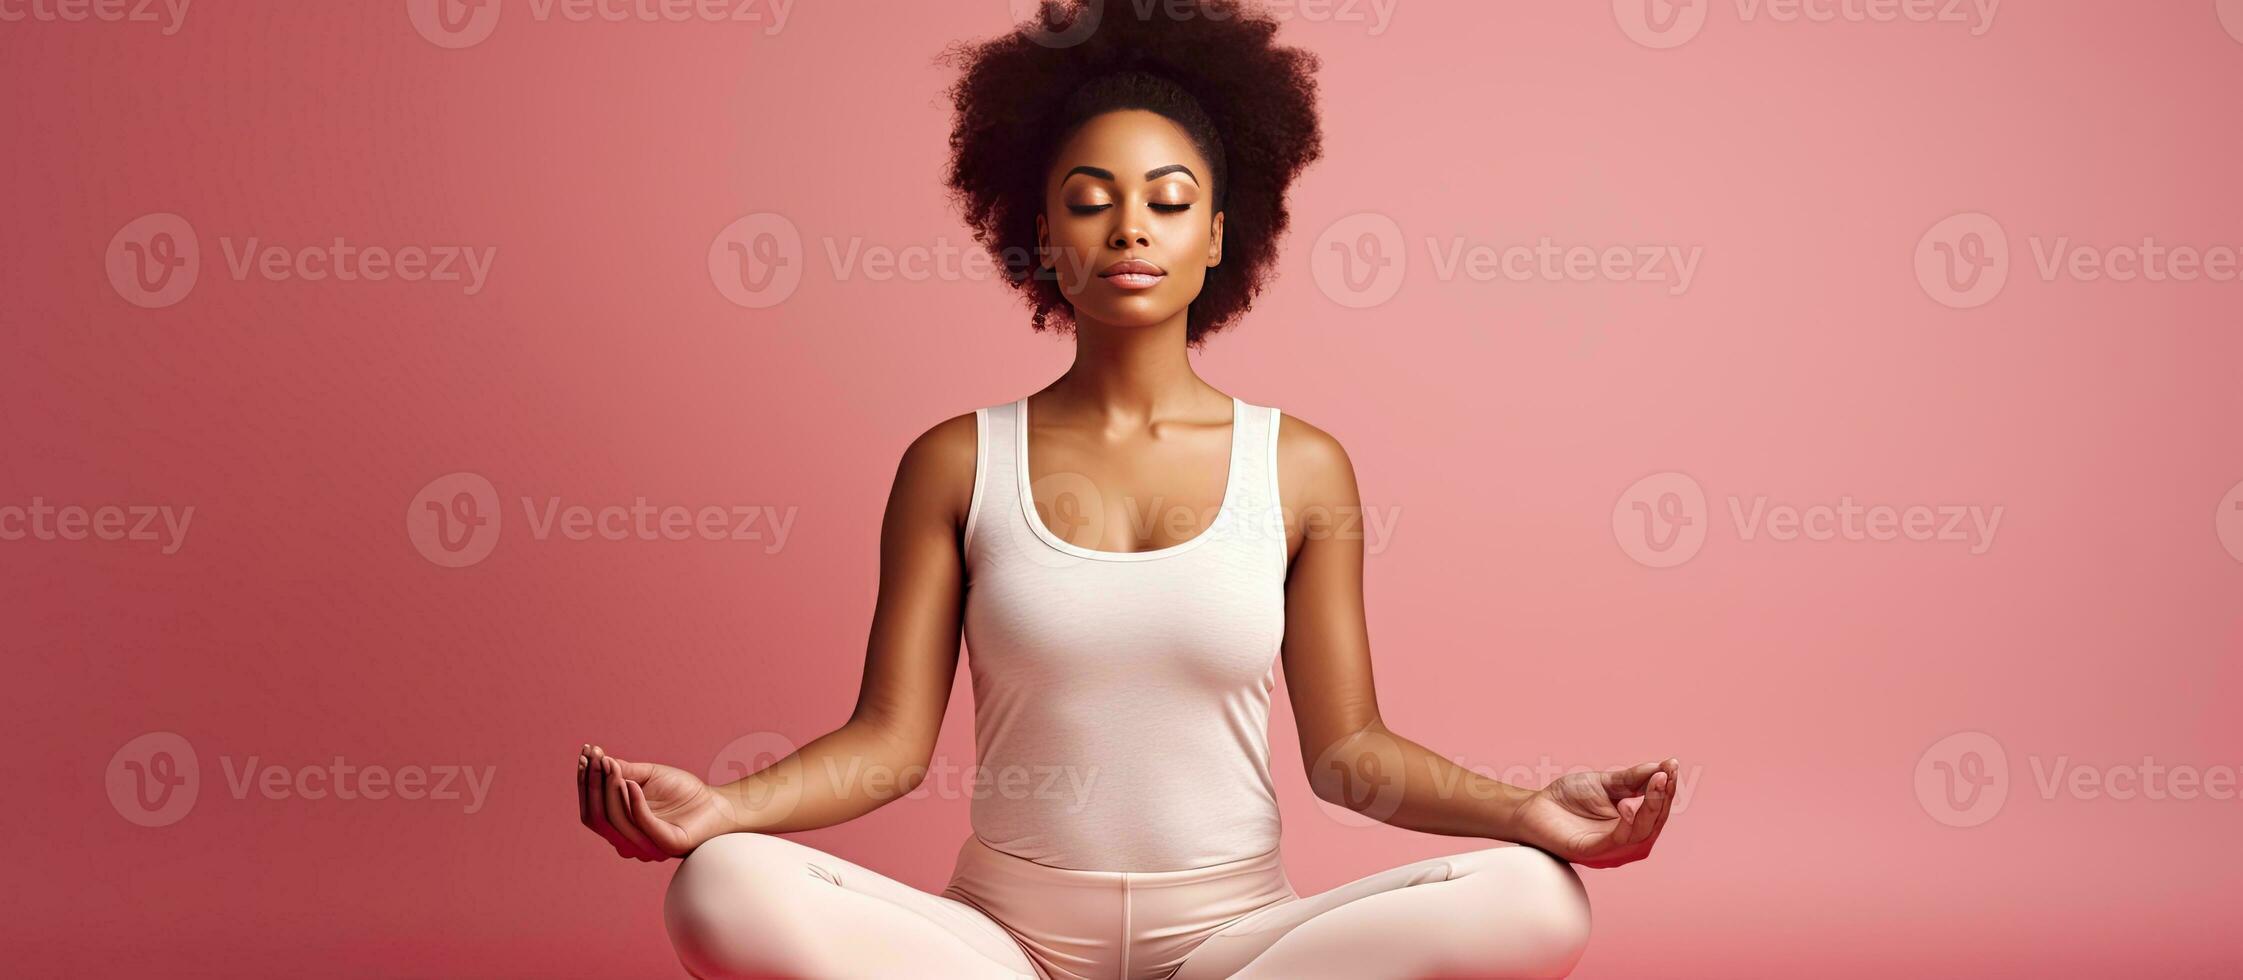 Serene woman in athletic attire finding tranquility through yoga after fitness regimen seated on pink backdrop ample room for text Physical wellness and s photo